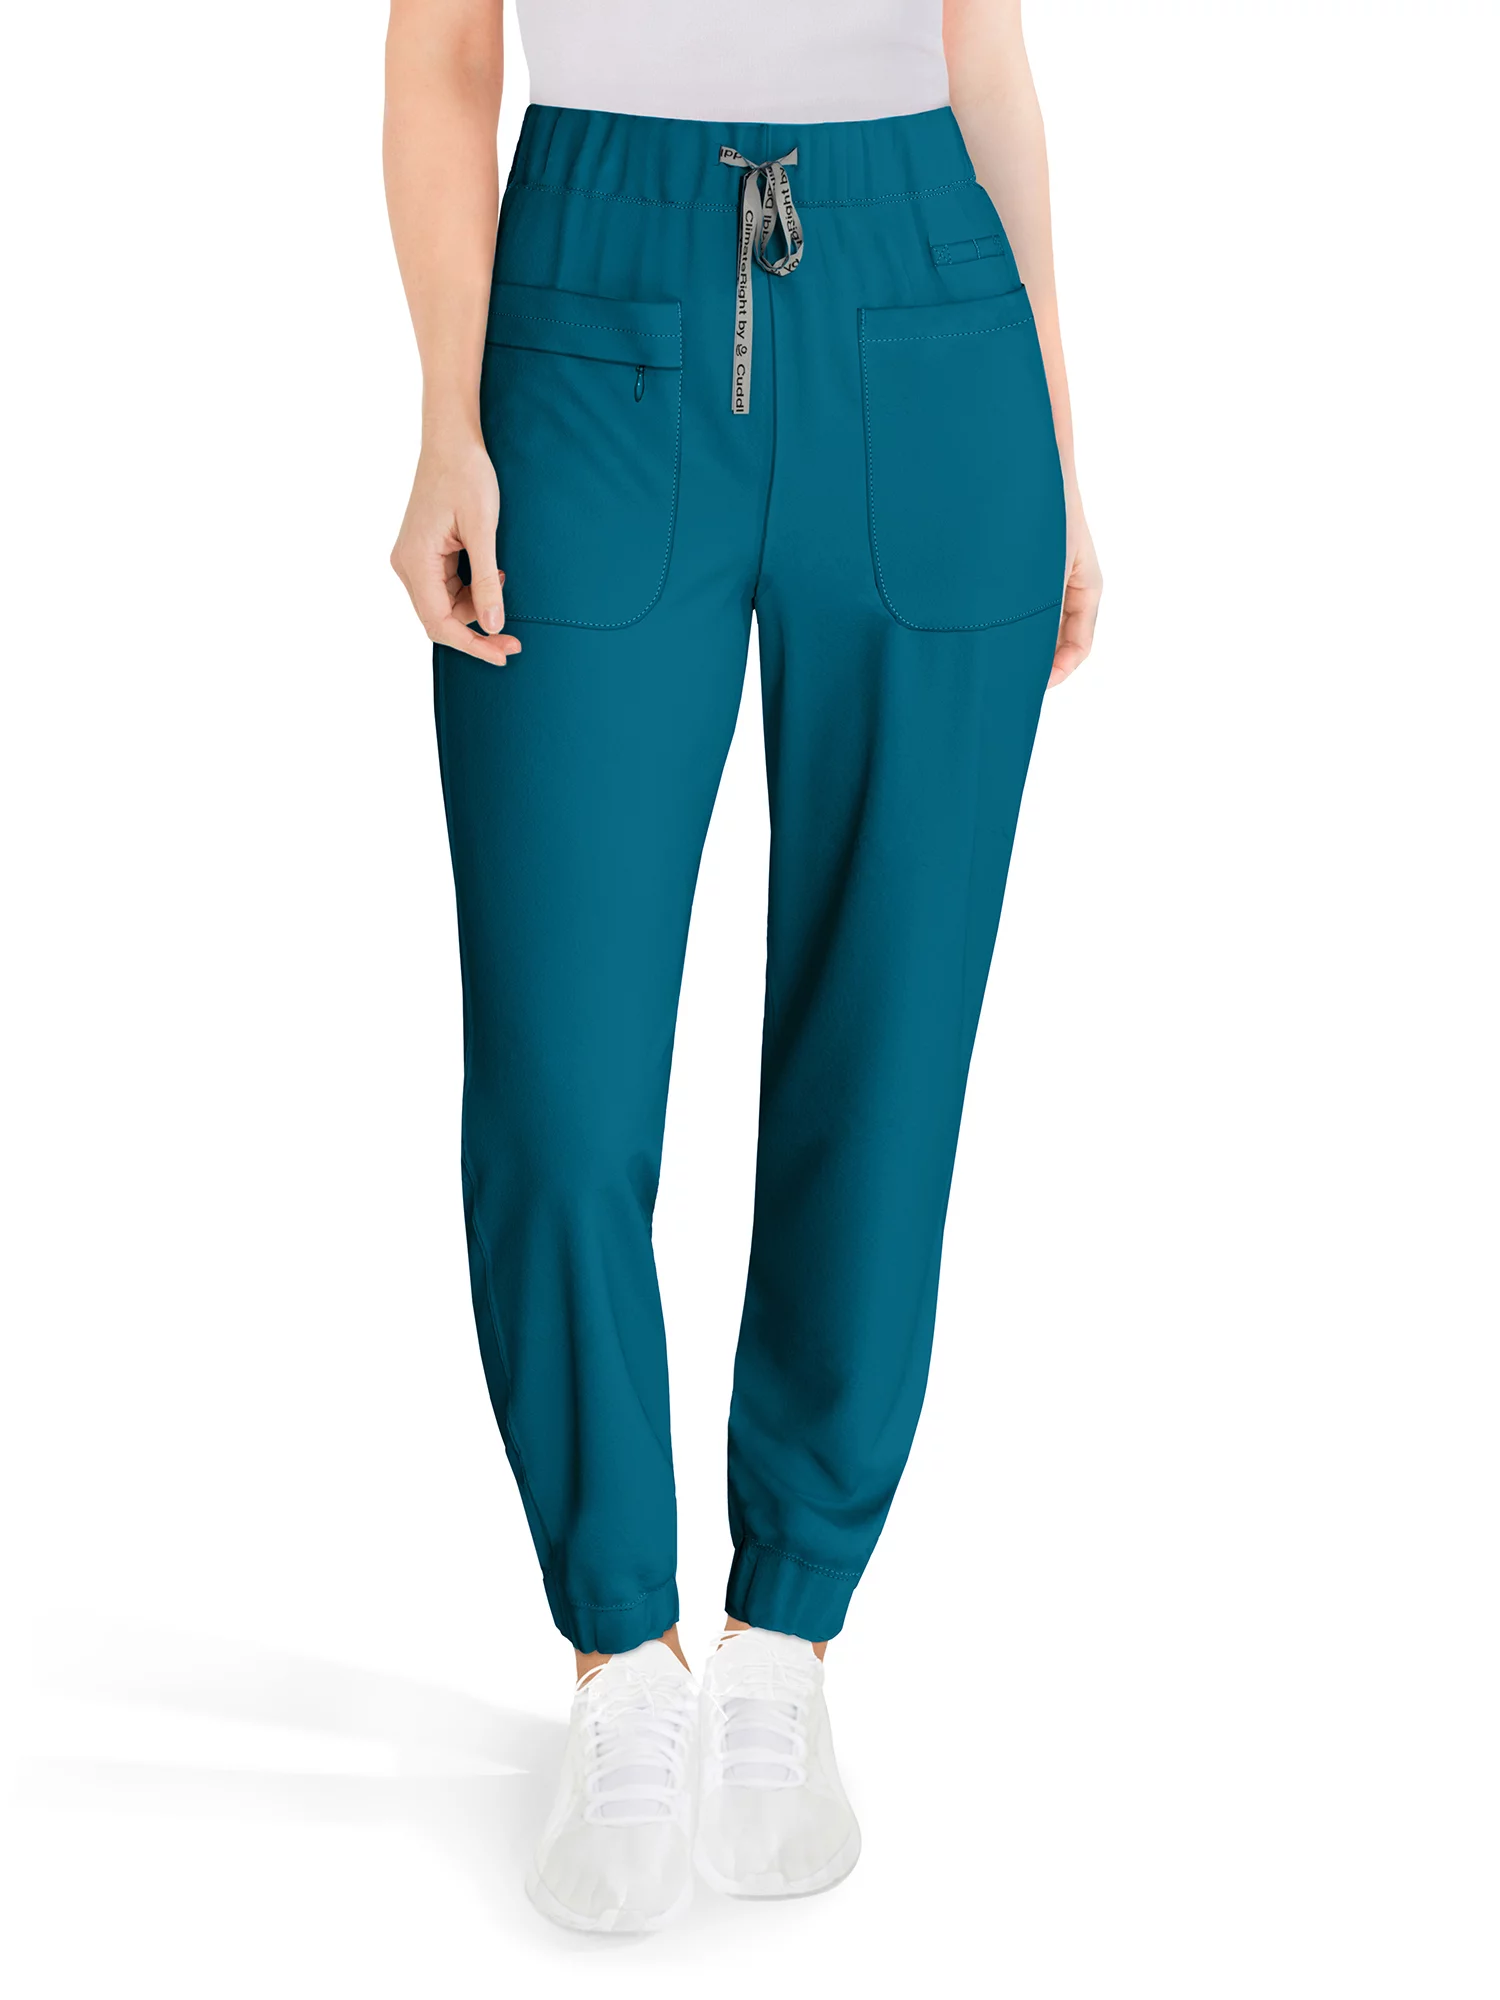 ClimateRight by Cuddl Duds Stretch Woven Scrub Jogger (Women's and